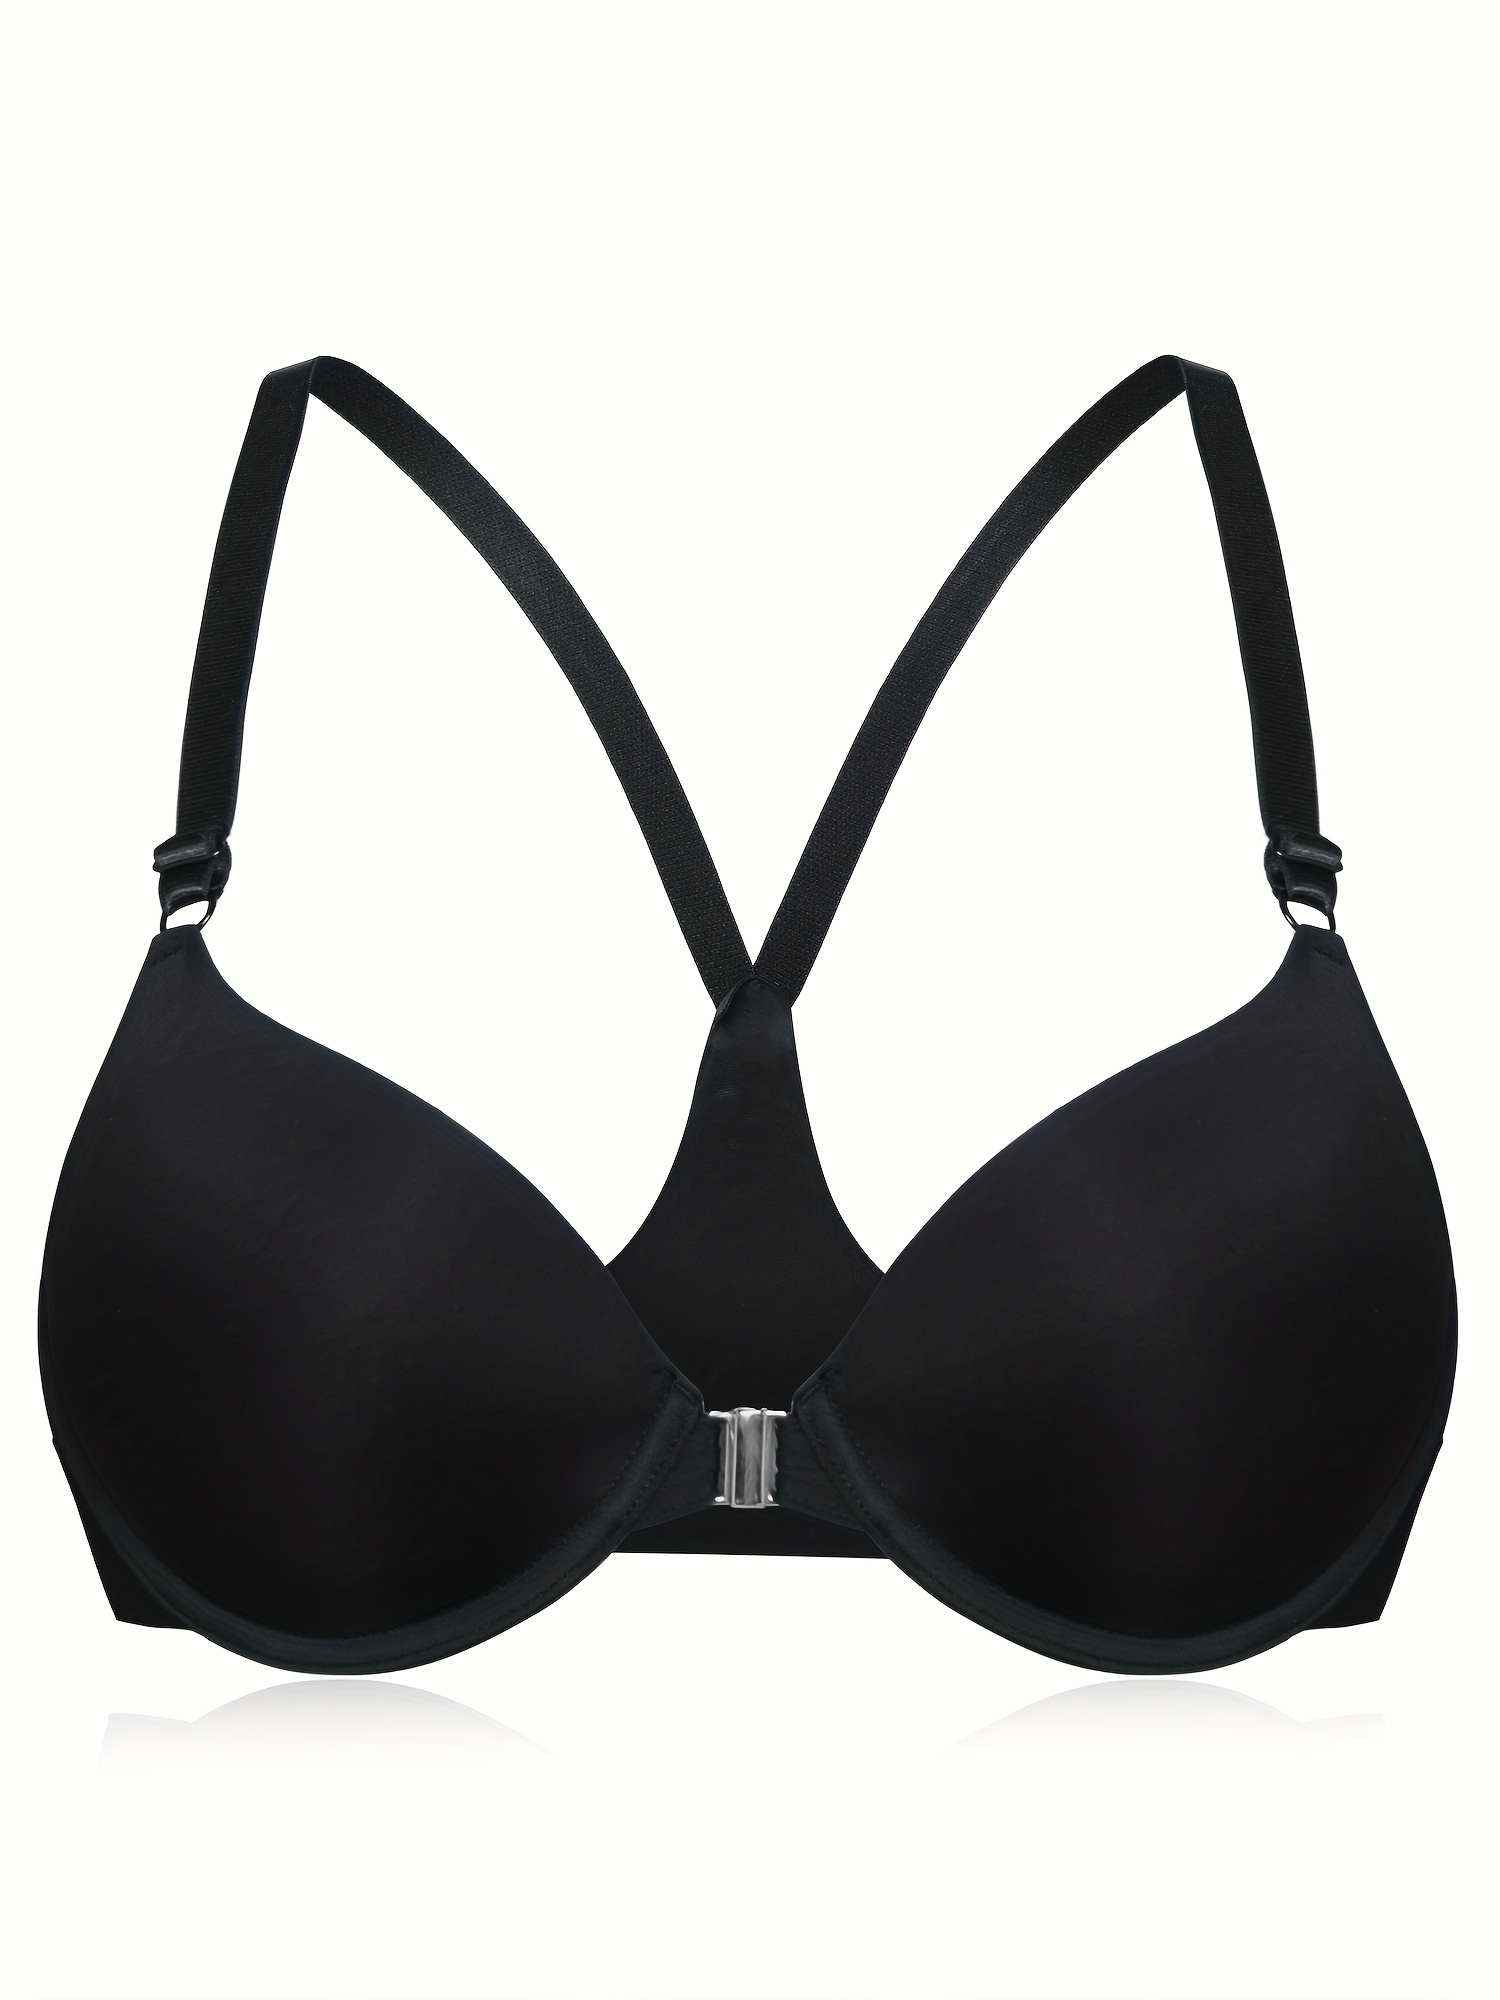 Women's Front Closure Sexy Lace Push Up Bra